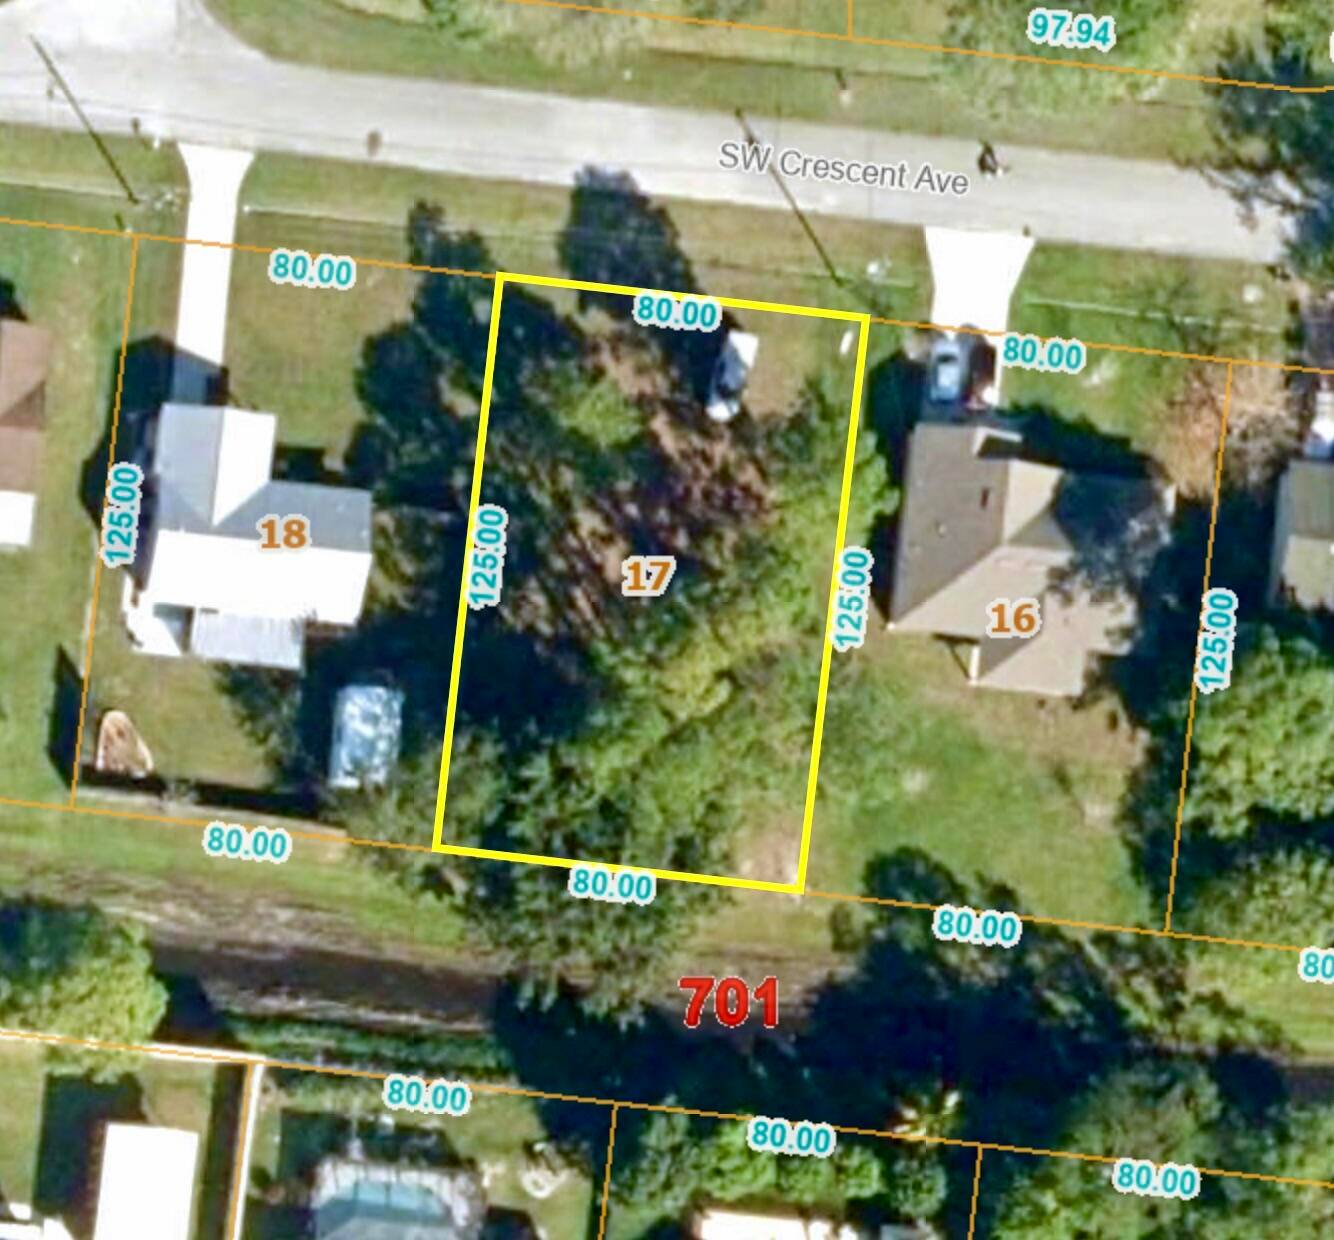 Discover the perfect place to build your dream home on this exceptional street in Central Port St Lucie.